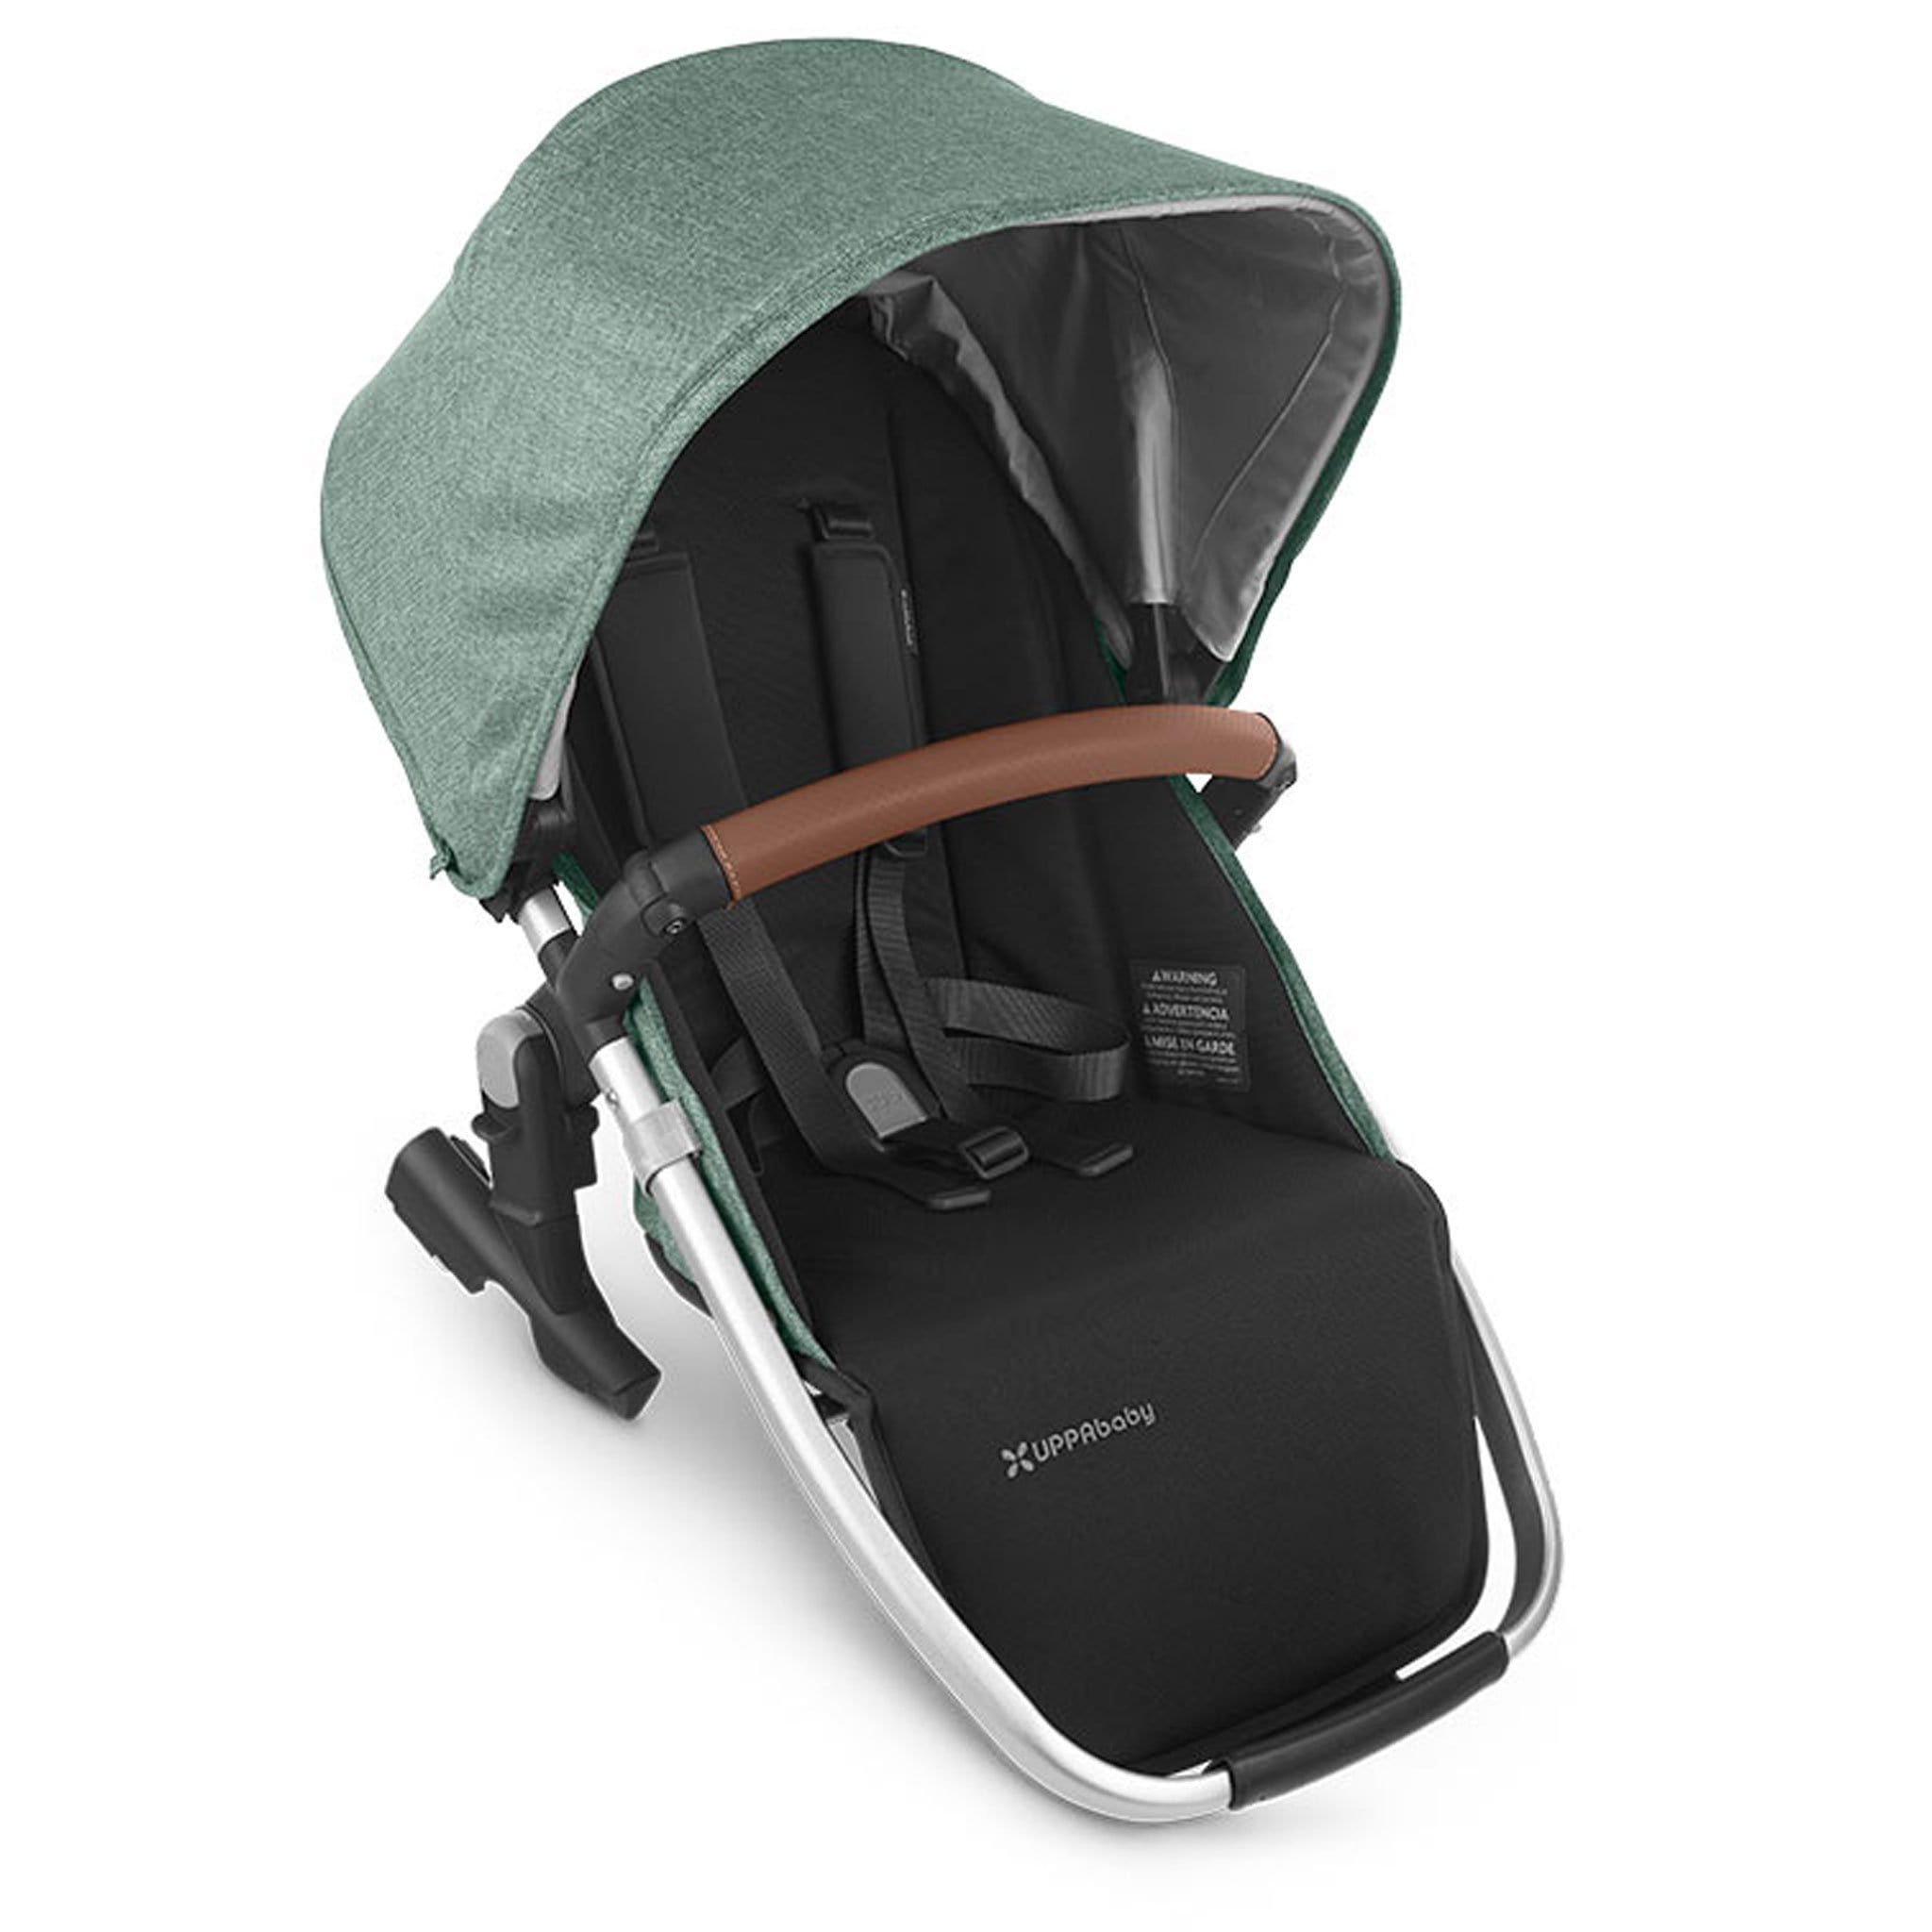 Uppababy buggy accessories UPPAbaby Vista Rumble Seat Emmett